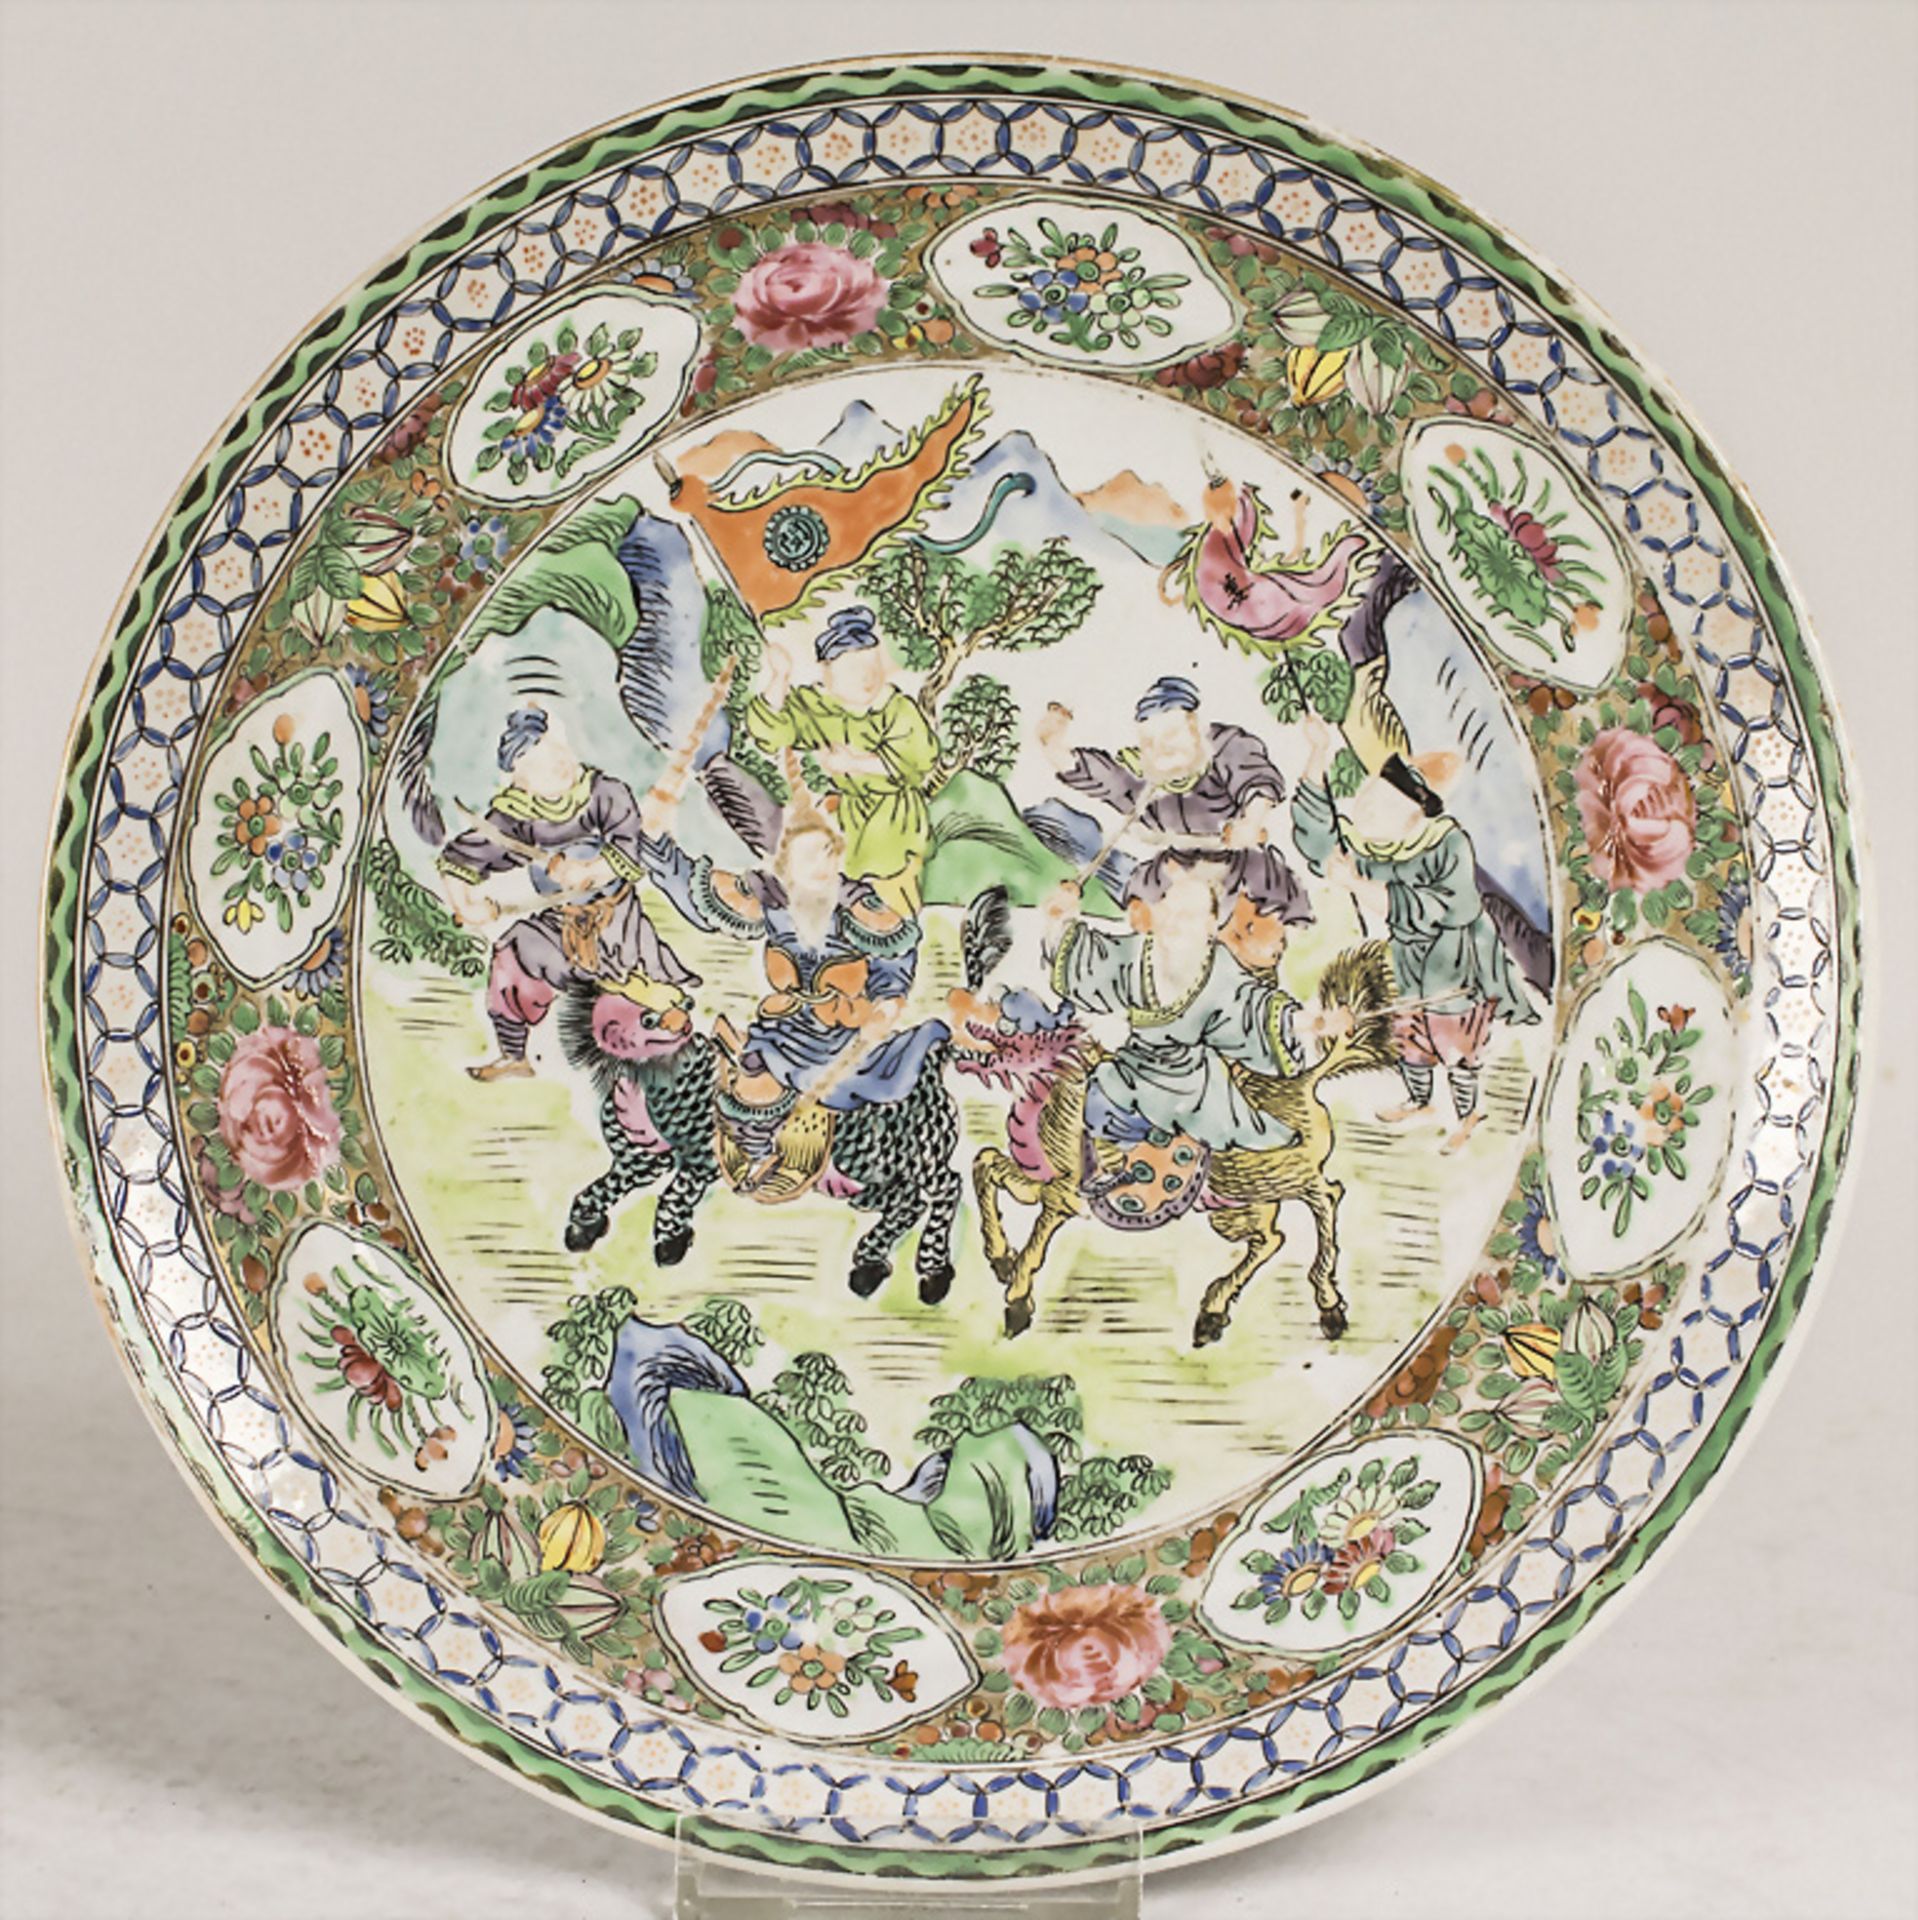 Teller / A plate, China, Qing Dynastie (1644-1911), 18./19. Jh.